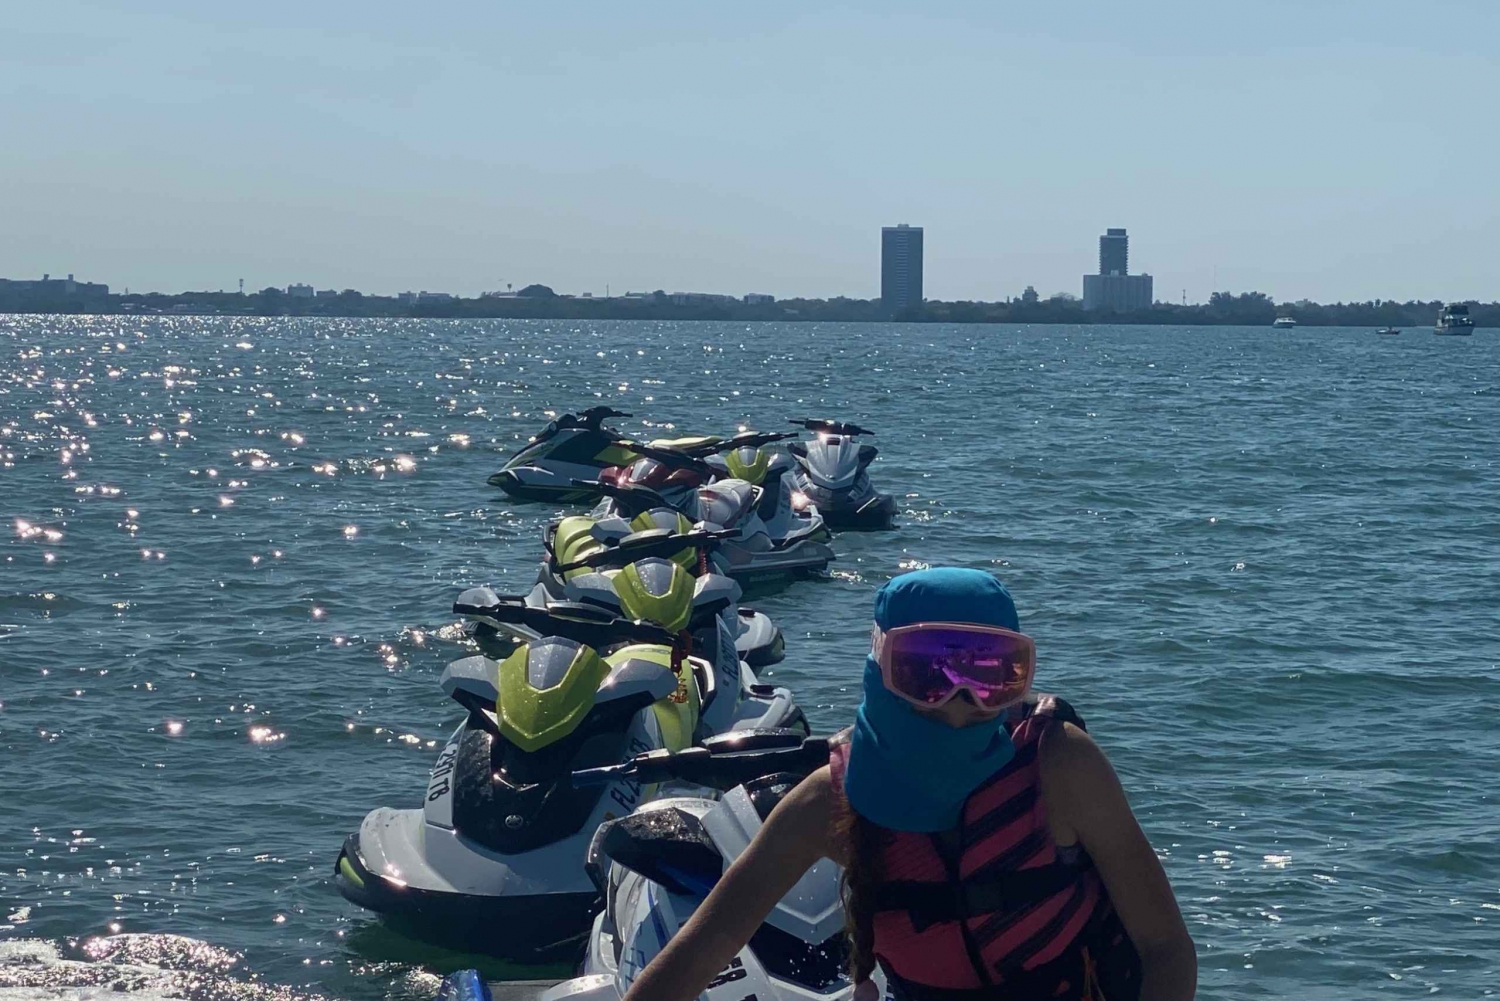 Miami: Biscayne Bay 1-hour Jet Skiing and Pontoon Boat Ride in Miami